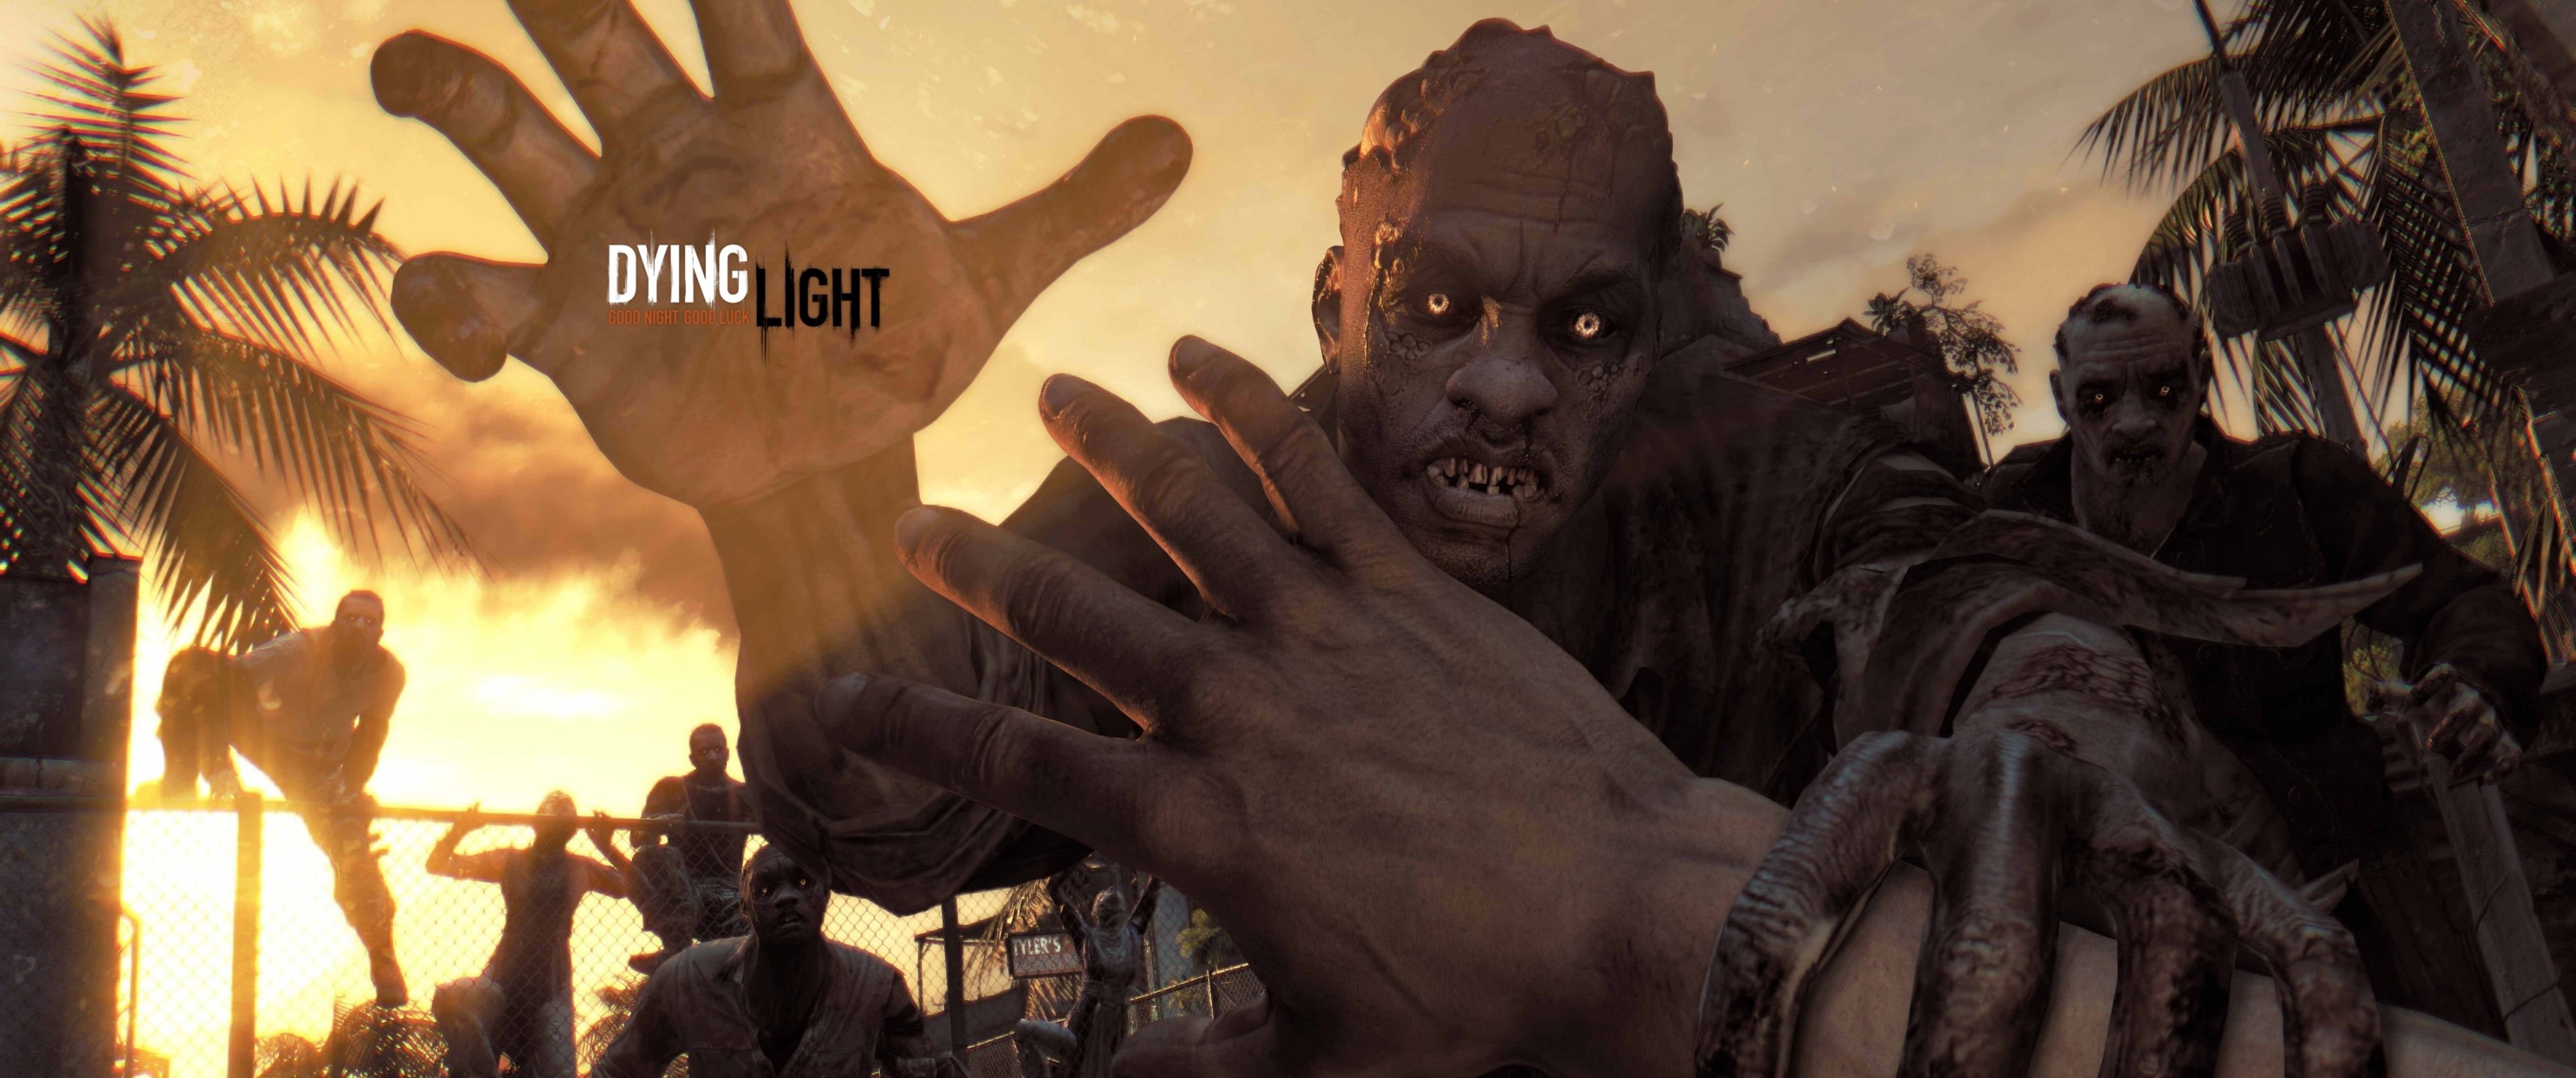 video Games, Dying Light, Zombies Wallpaper